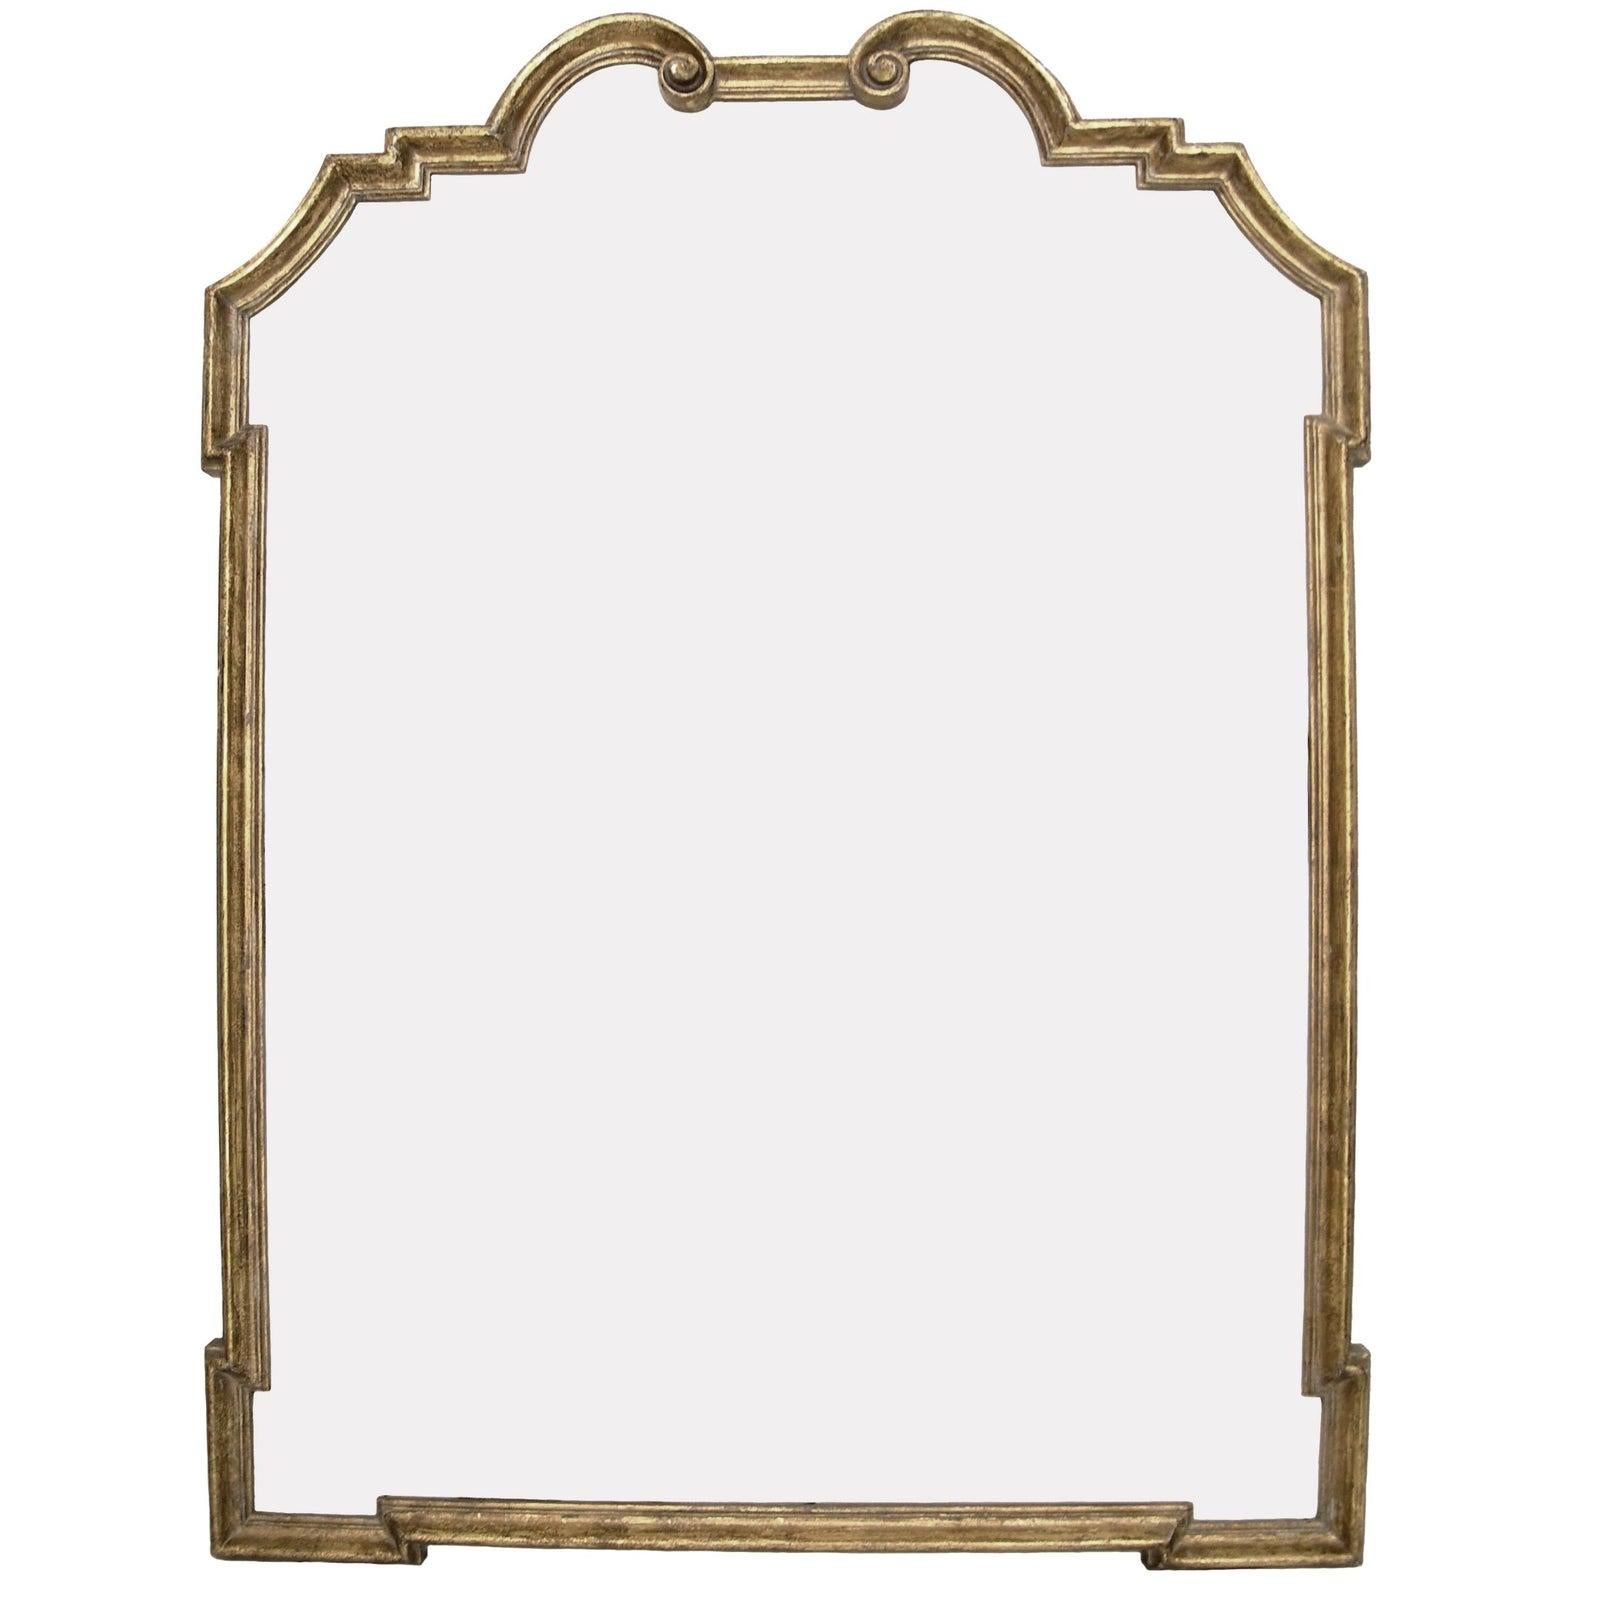 Italian giltwood designer mirror by Randy Esada. Available in yellow or white gold

Up-charge for aged mirror: $685

4 in stock, 2 yellow gold, 2 white gold.
  